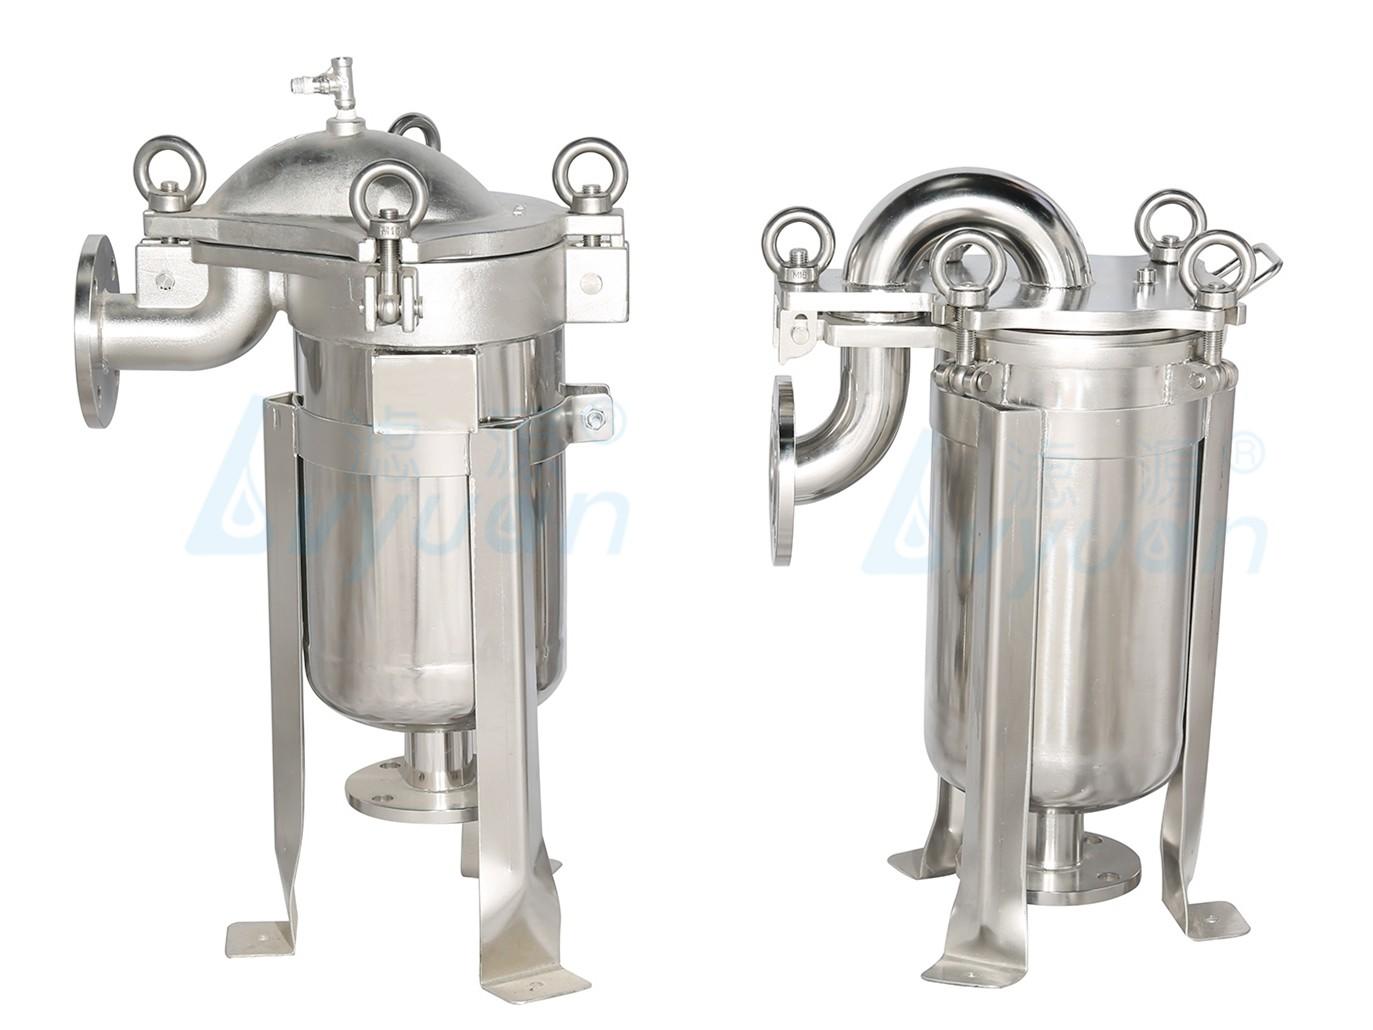 Lvyuan porous stainless water filter housing with core for food and beverage